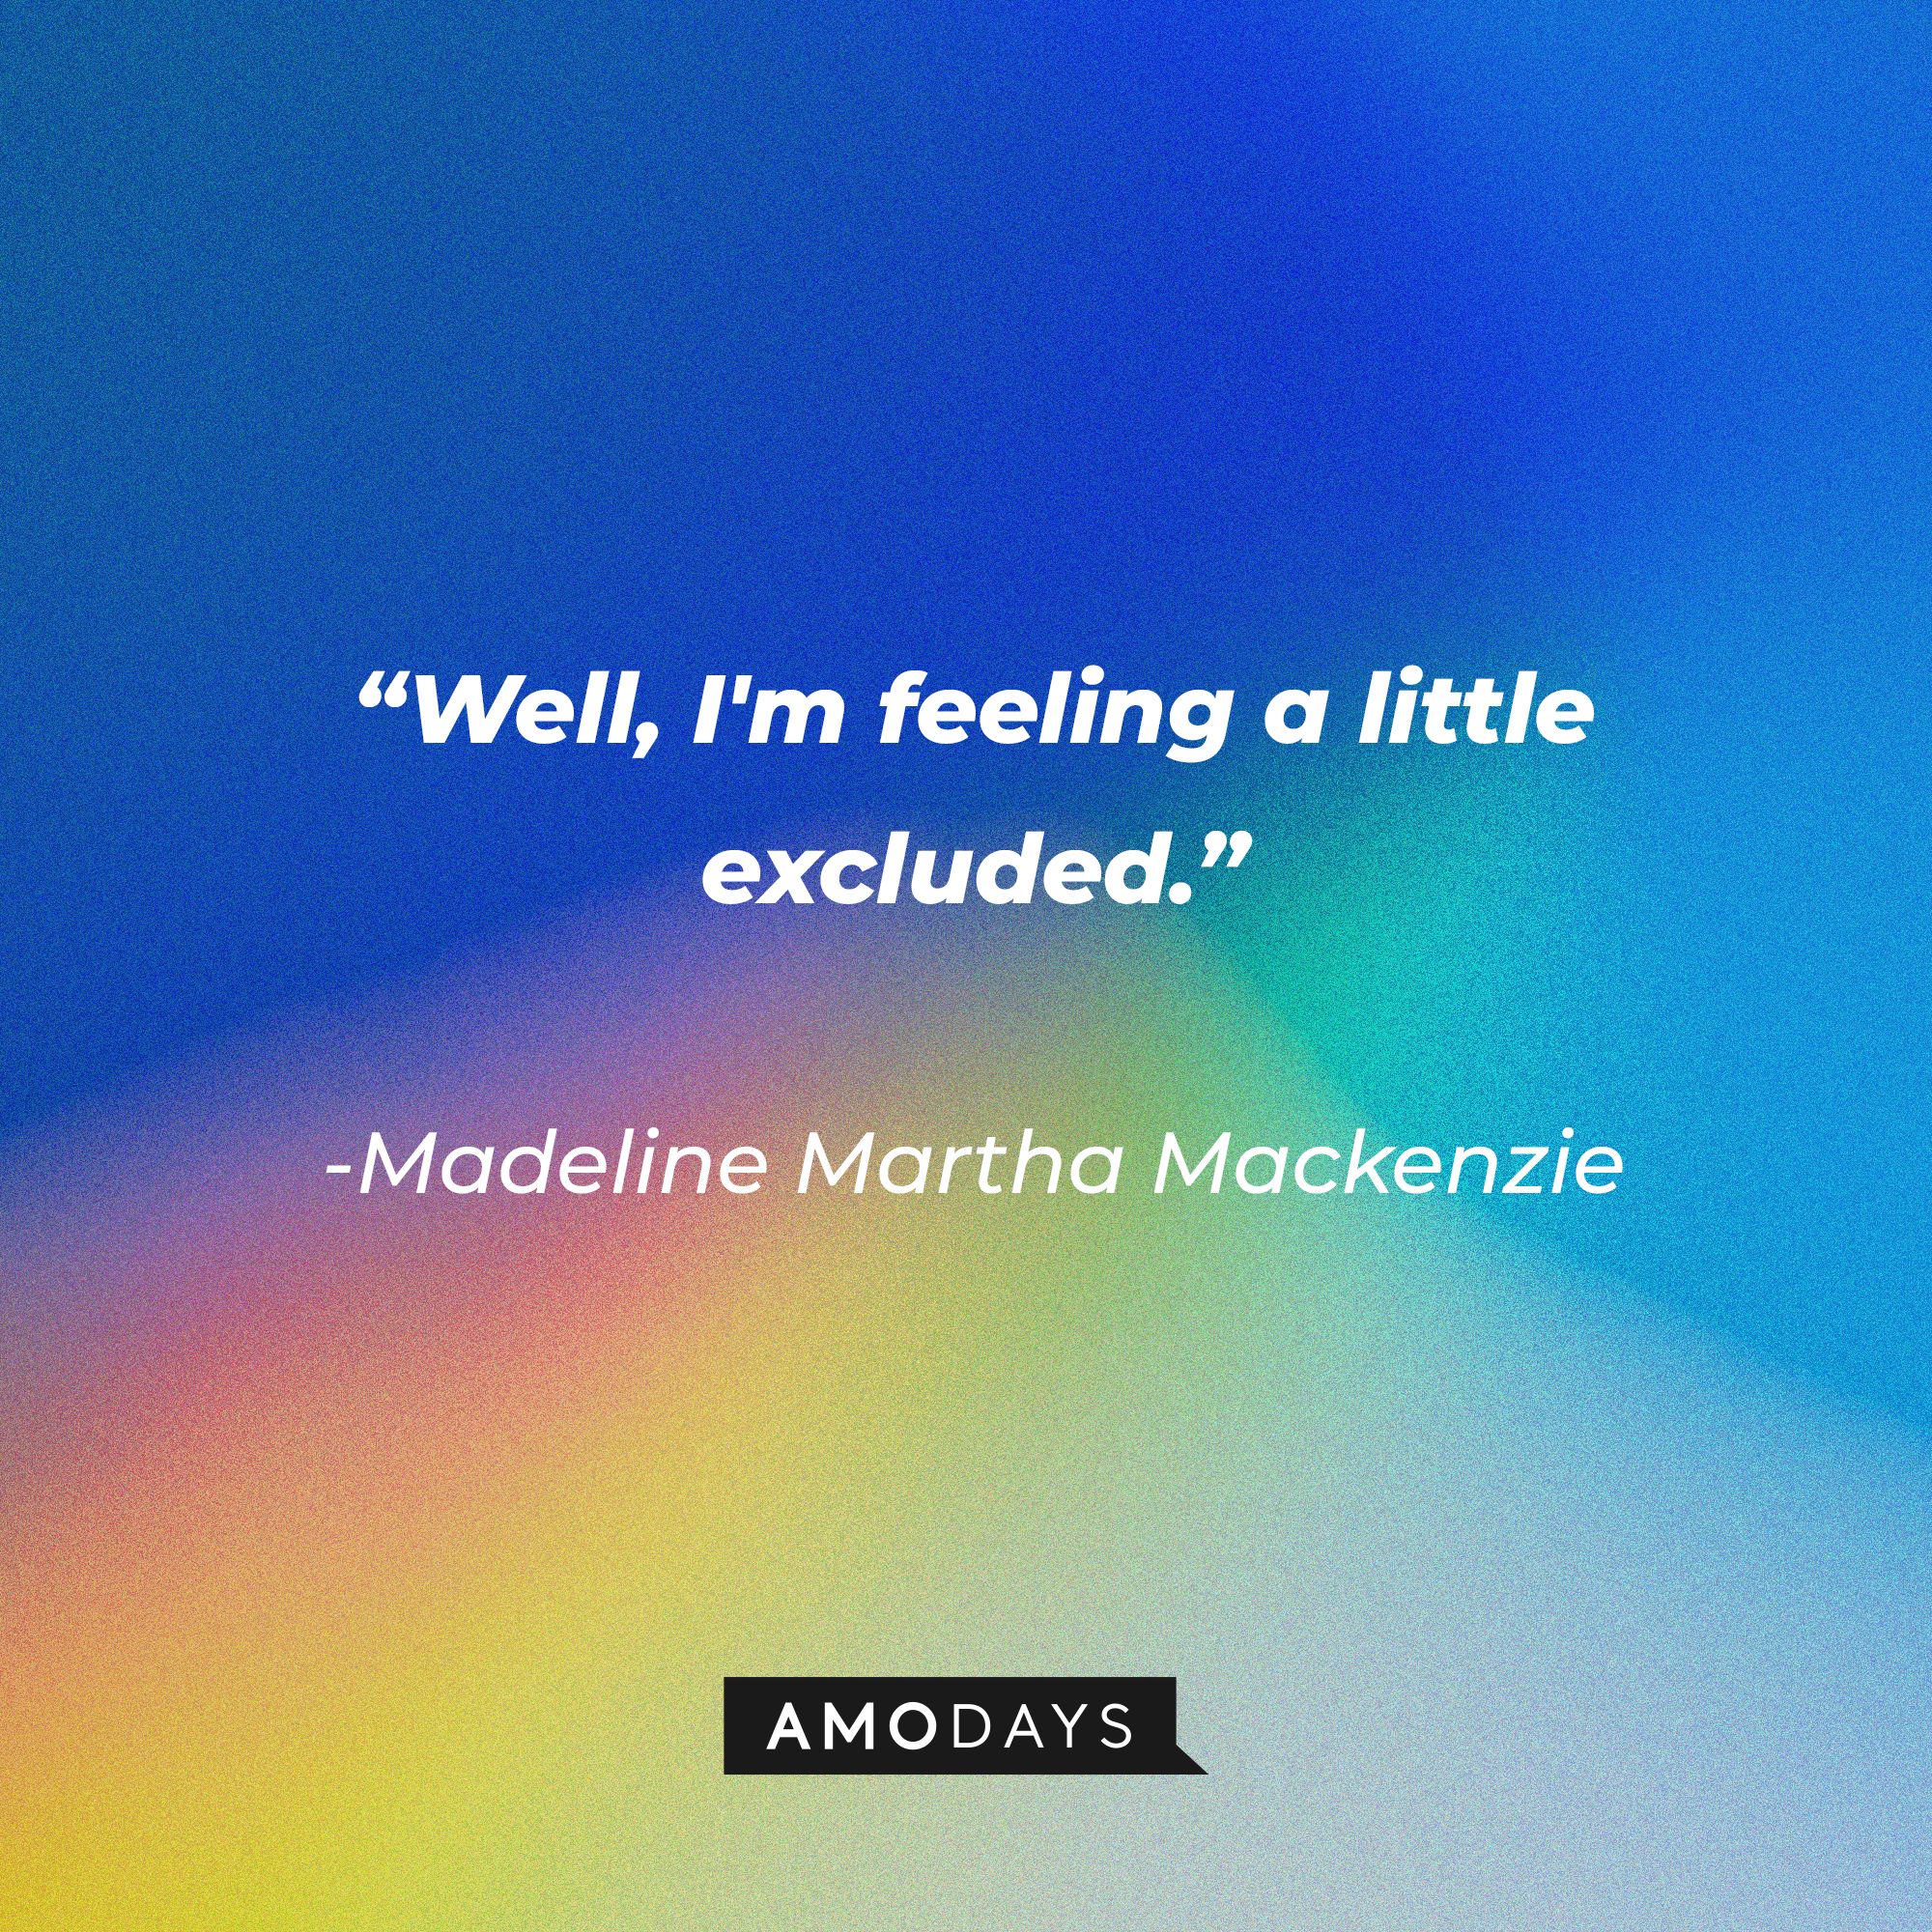 Madeline Martha Mackenzie's quote:  “Well, I'm feeling a little excluded.” │Source: AmoDays